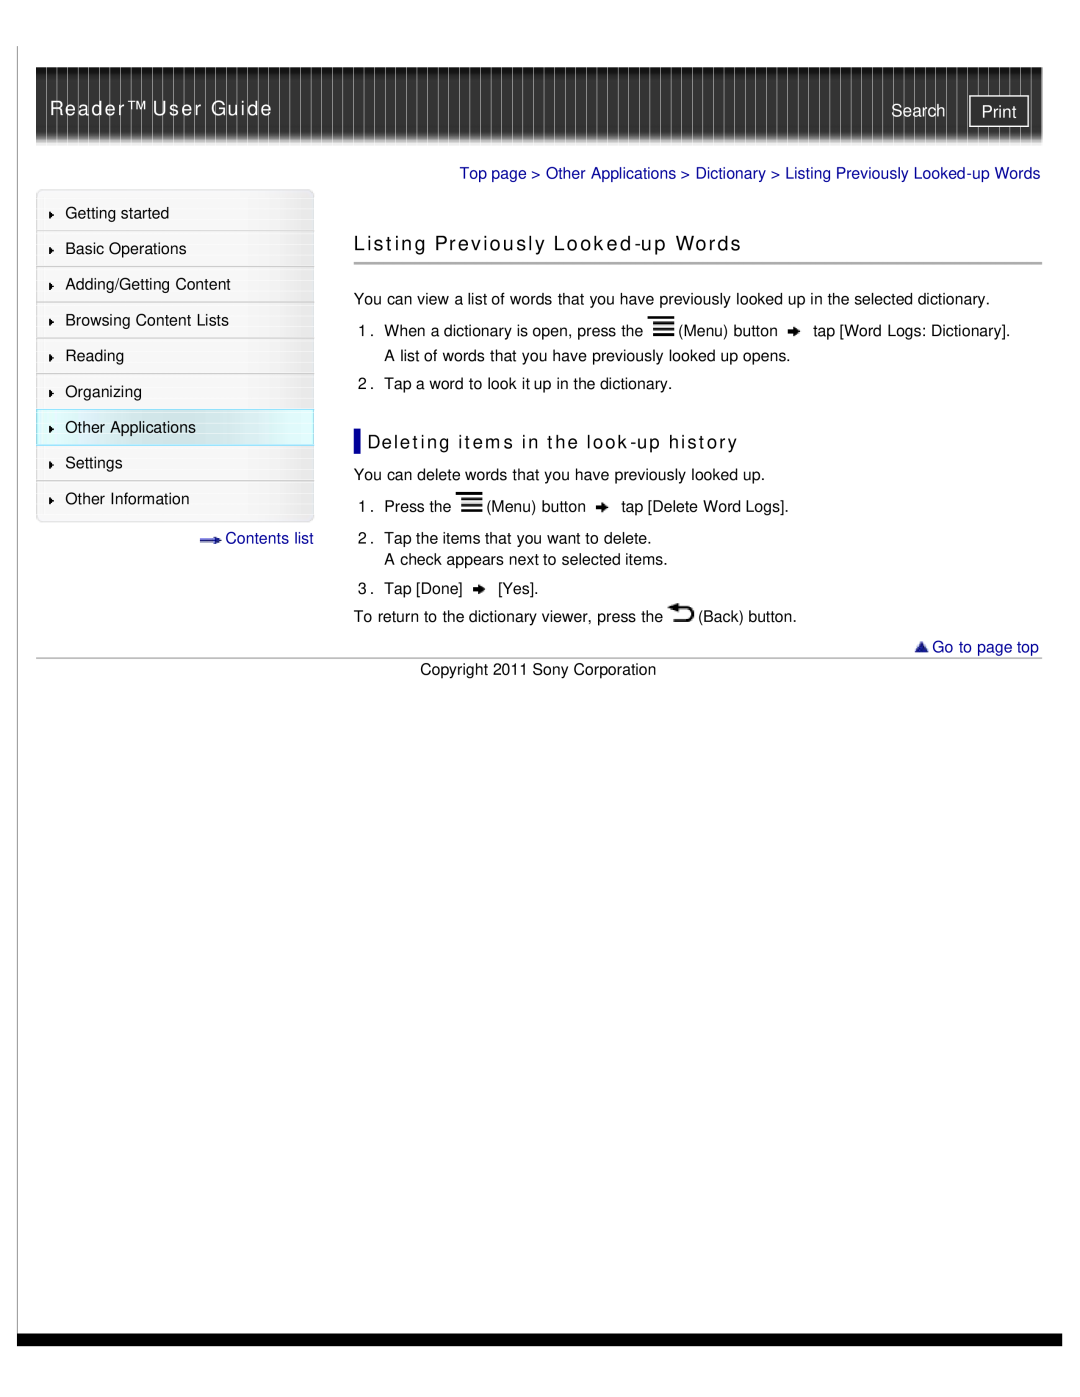 Sony PRS-T1RC Listing Previously Looked-up Words, Deleting items in the look-up history, Reader User Guide, Search, Print 